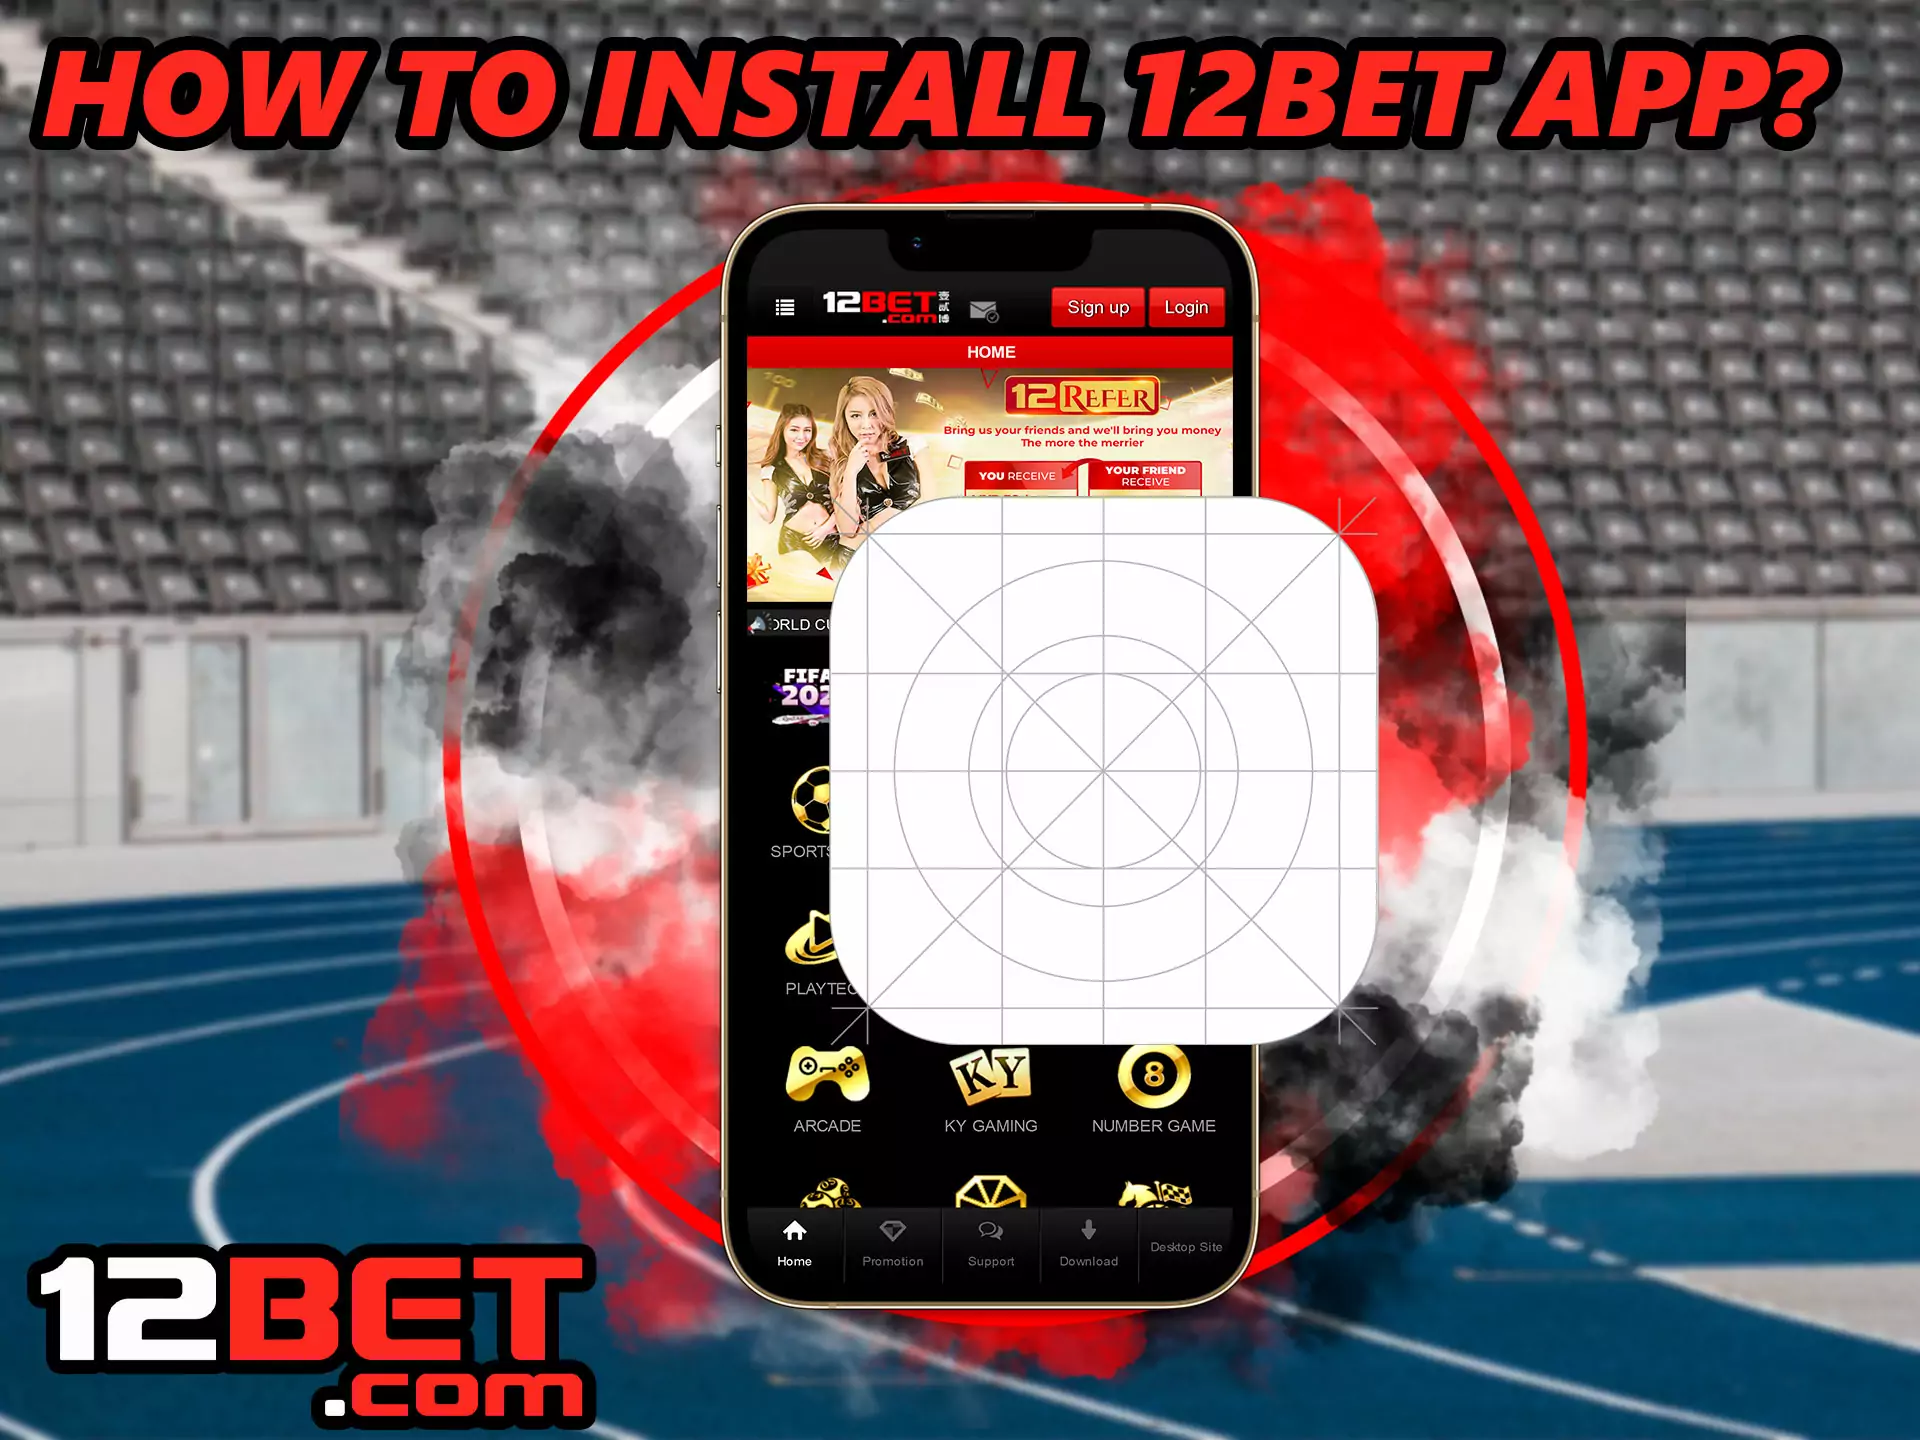 The instructions that we have given in this article will help you successfully install the app for iOS and Android.